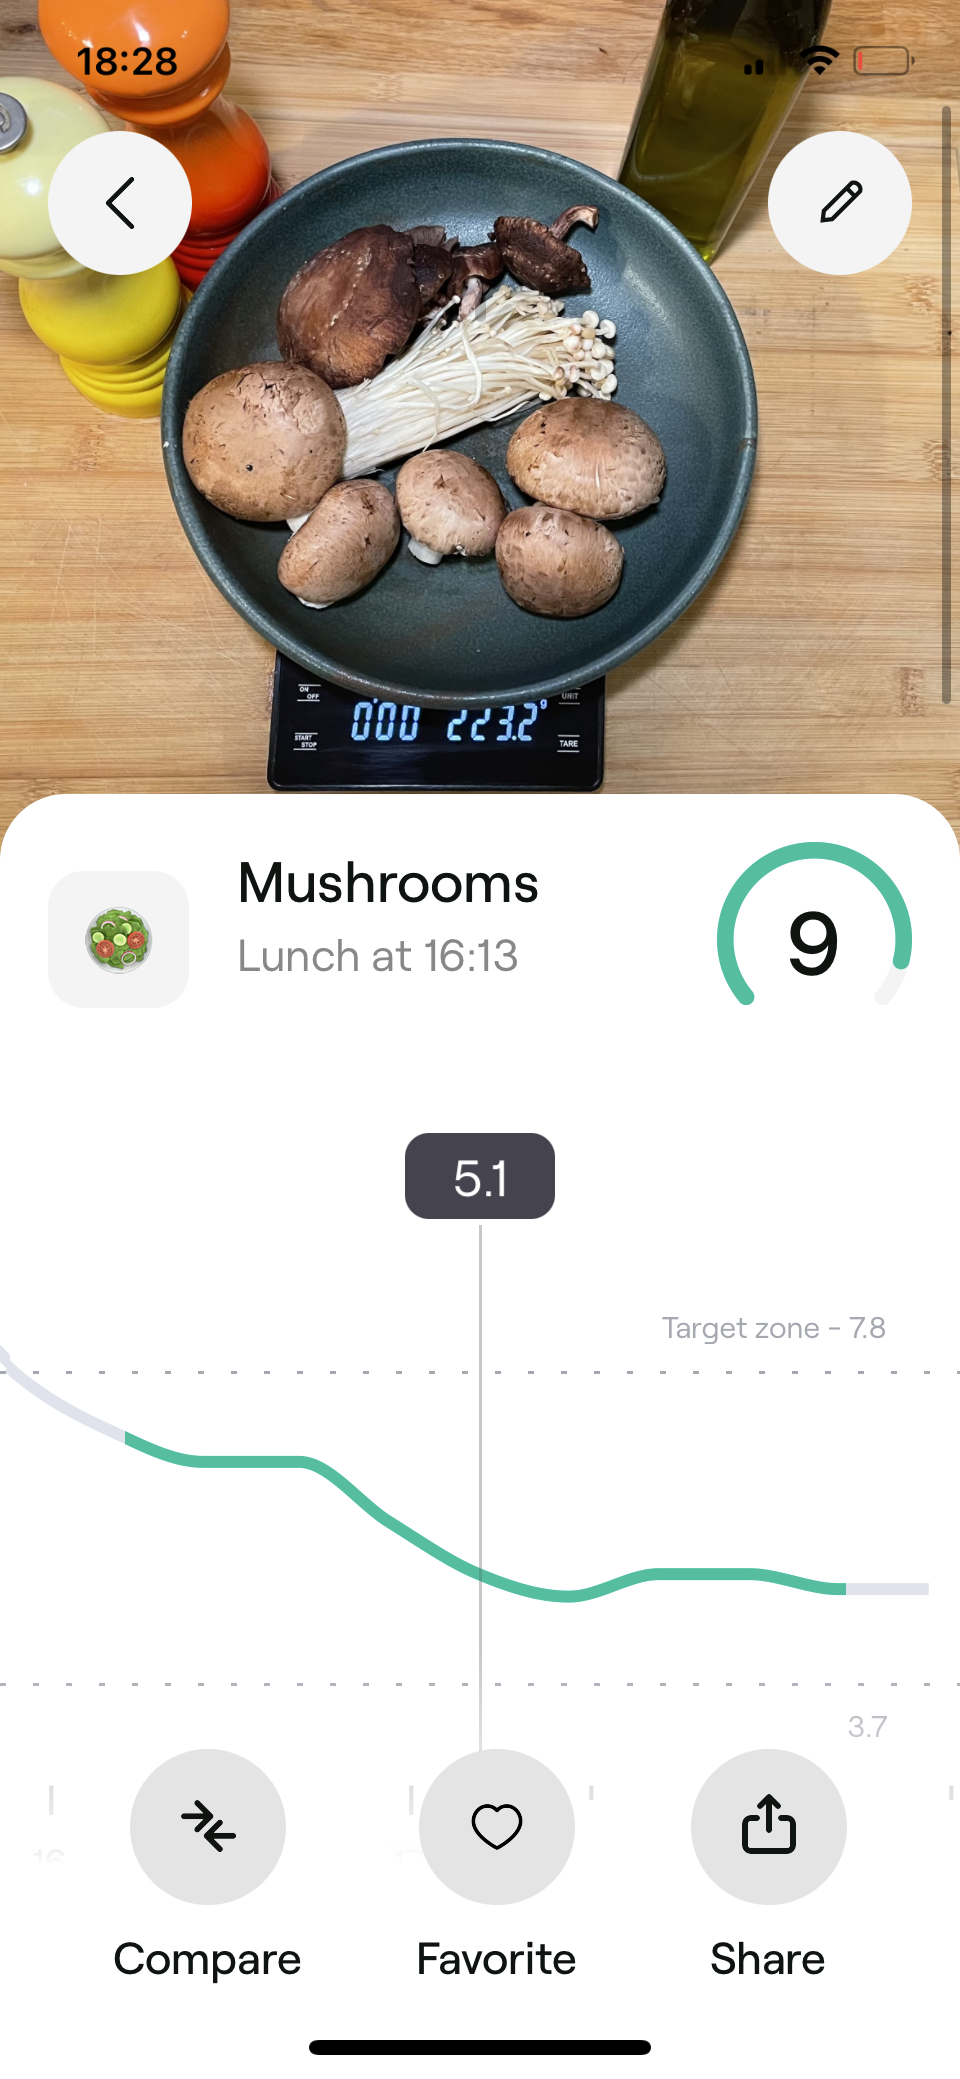 Mushrooms. Experiment by our expert